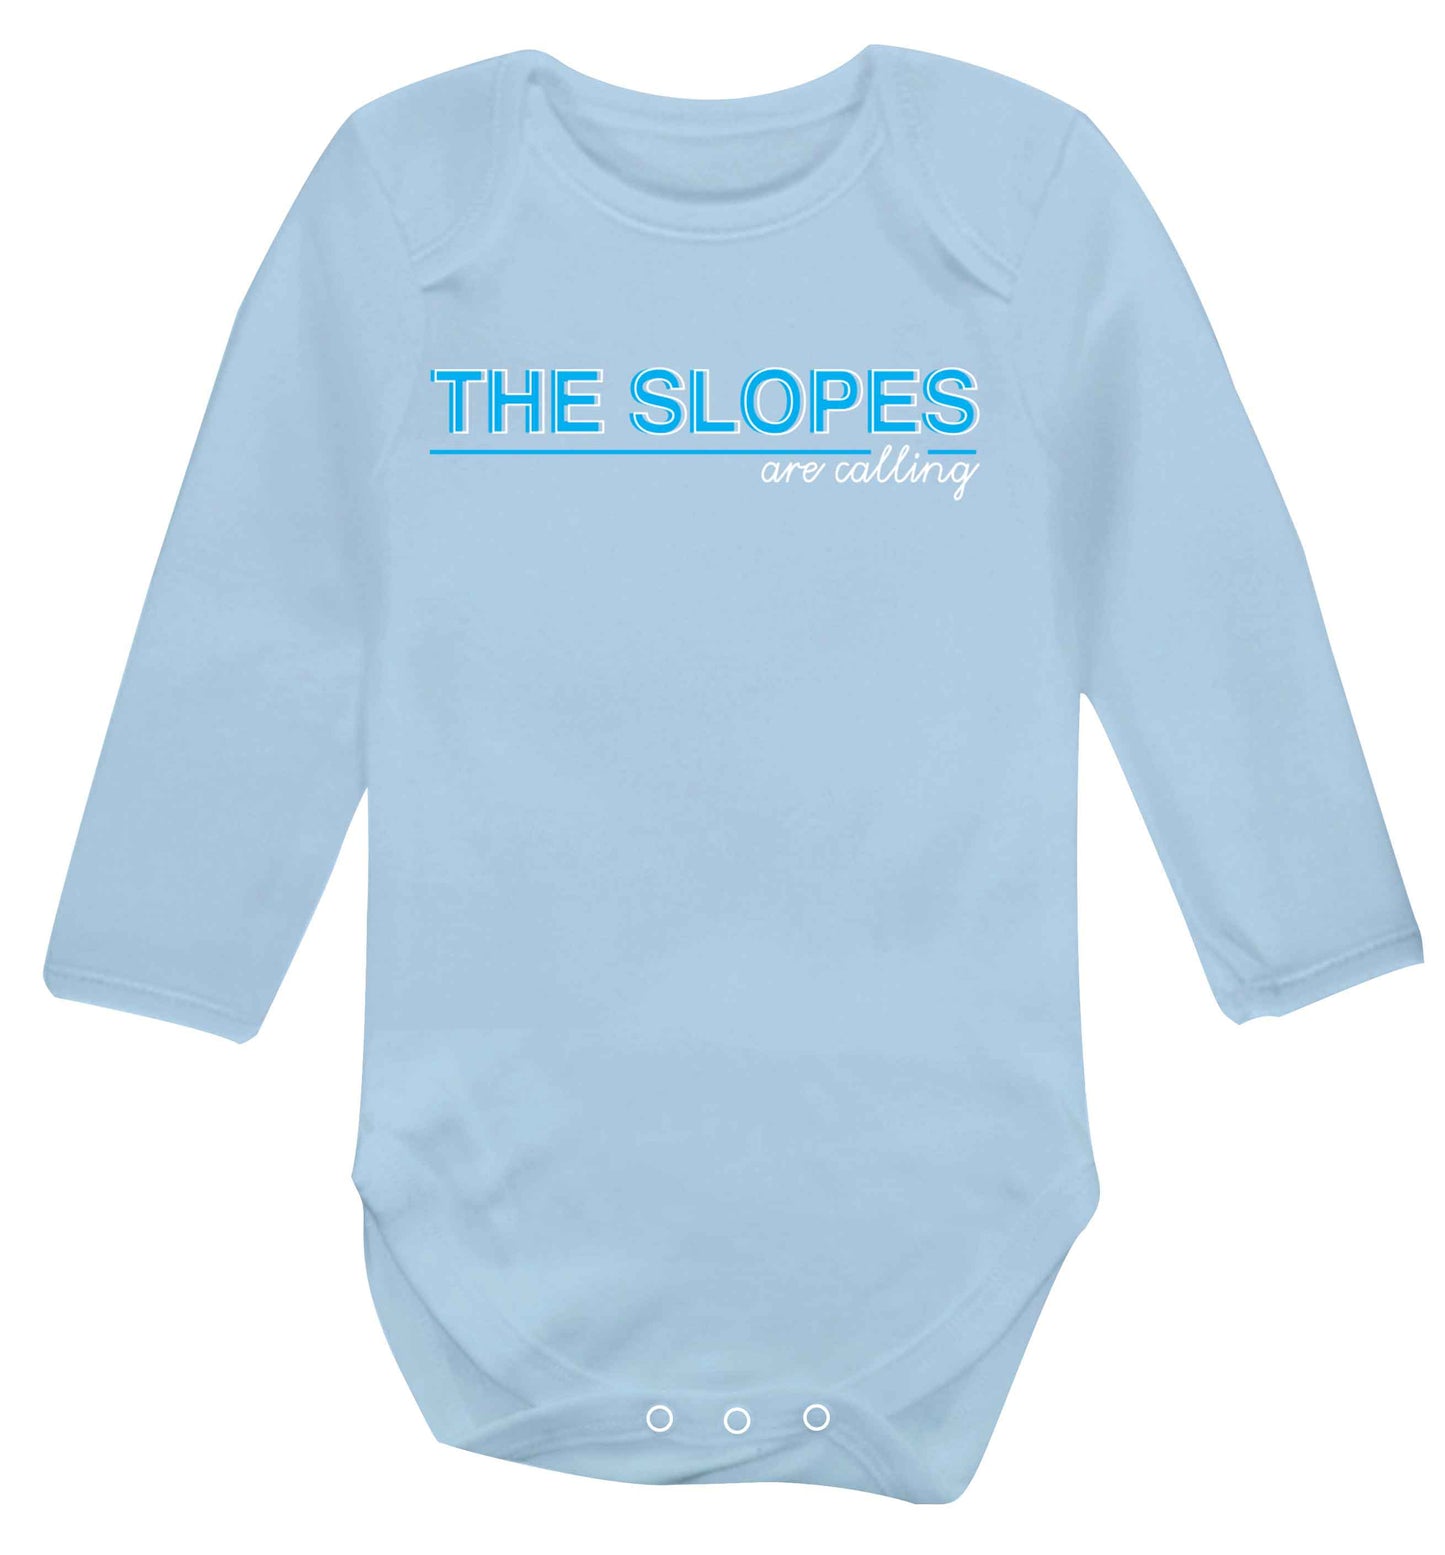 The slopes are calling Baby Vest long sleeved pale blue 6-12 months